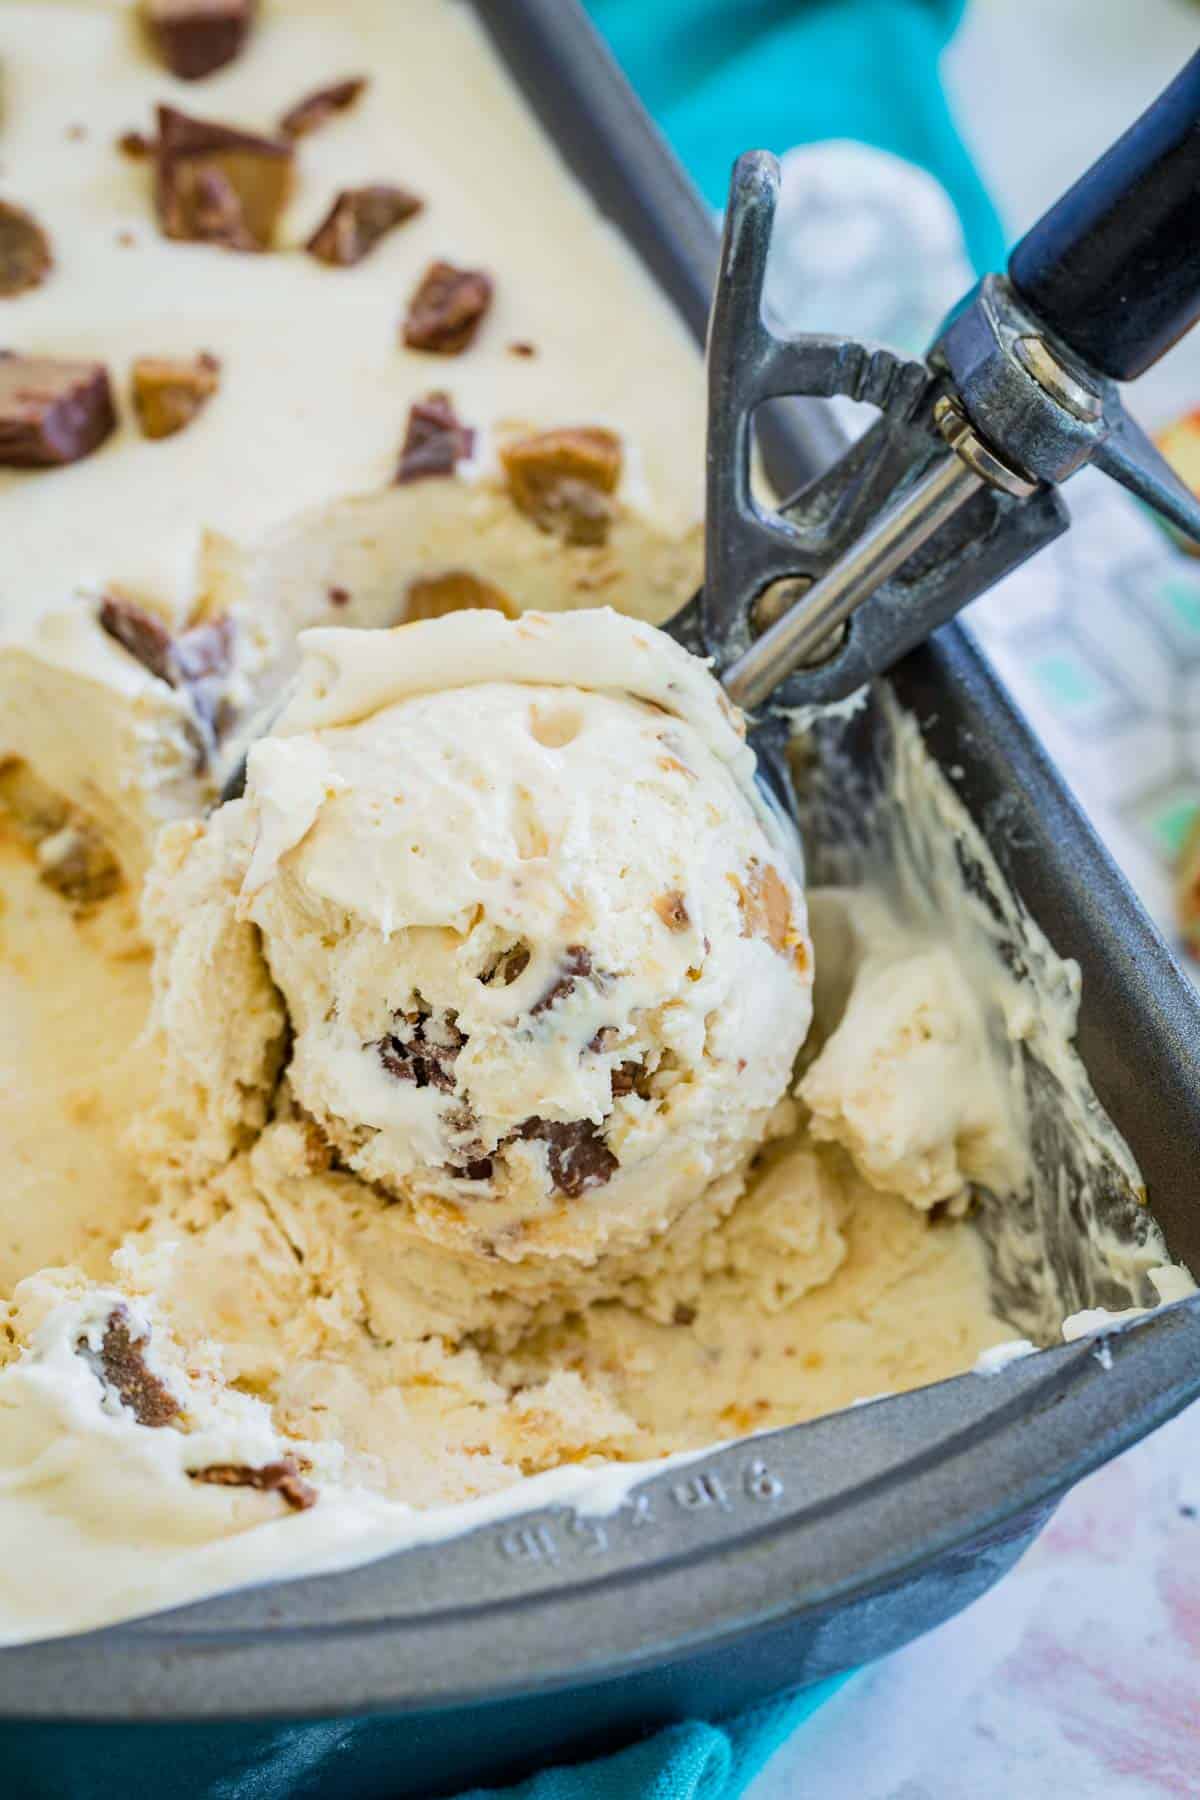 No-churn Reese's ice cream is scooped from a loaf pan with a large ice cream scoop.